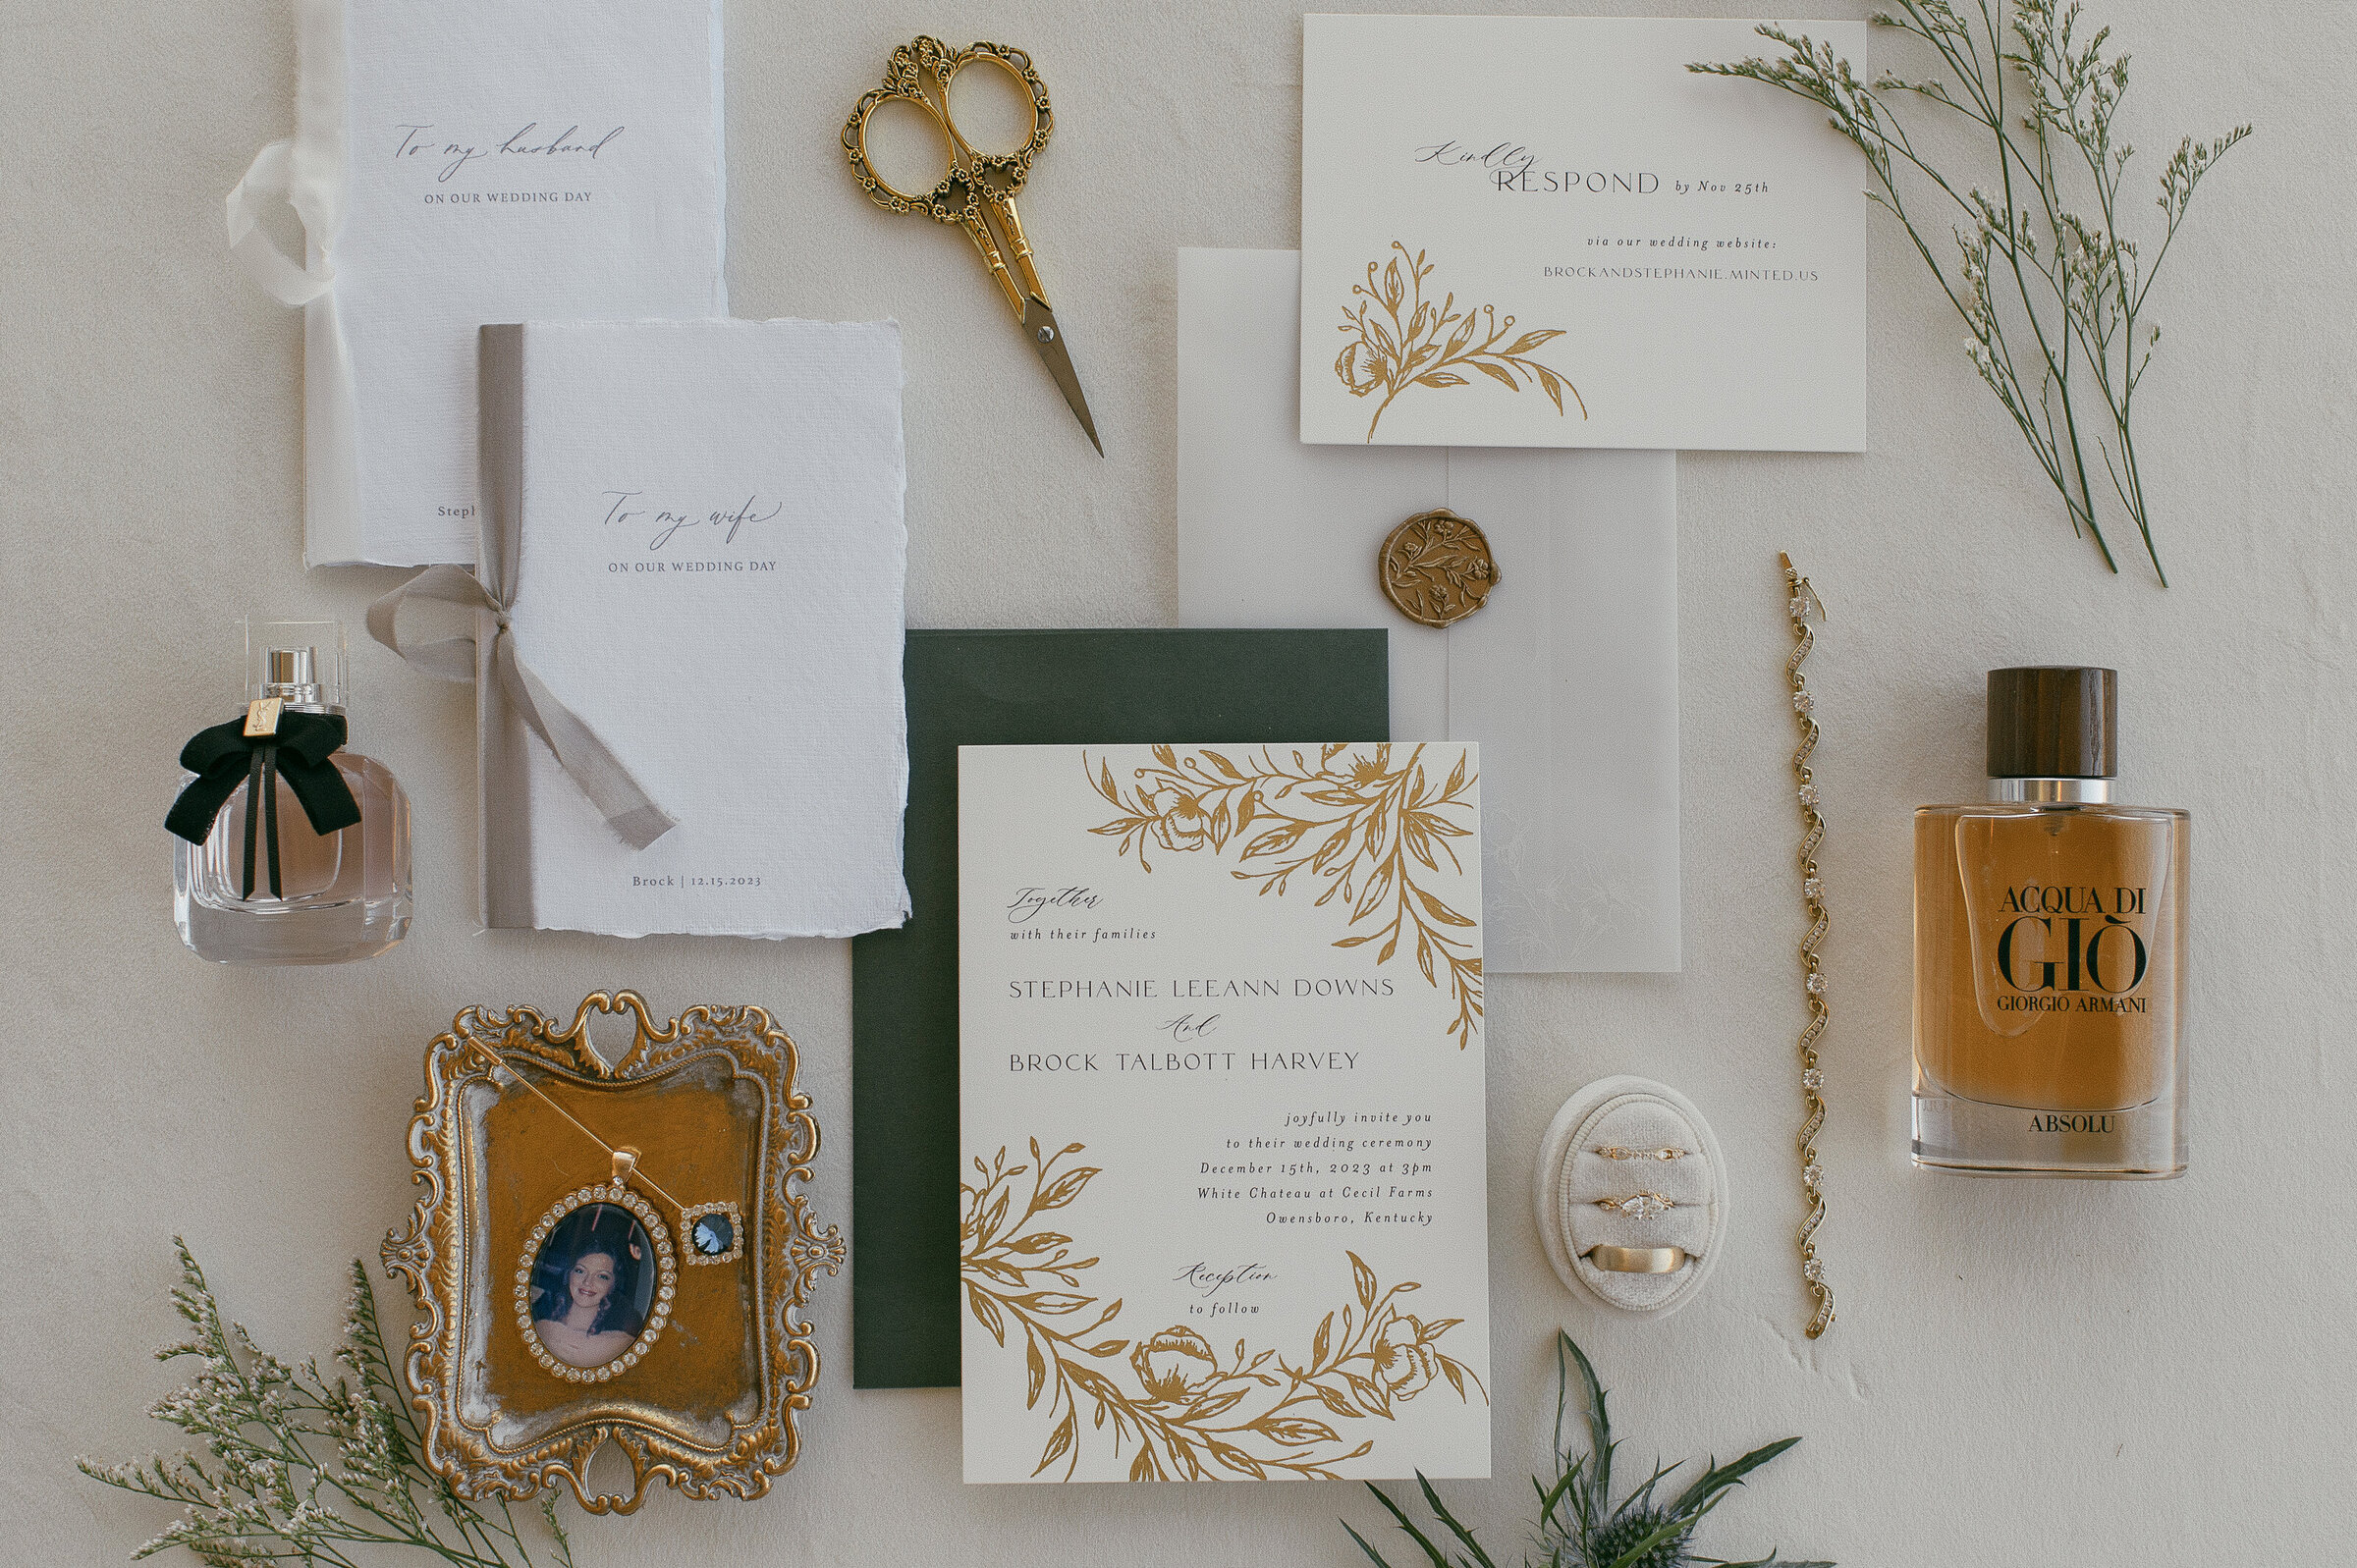 Wedding flat lay with invitation suite, perfume, jewelry, and handwritten letters.